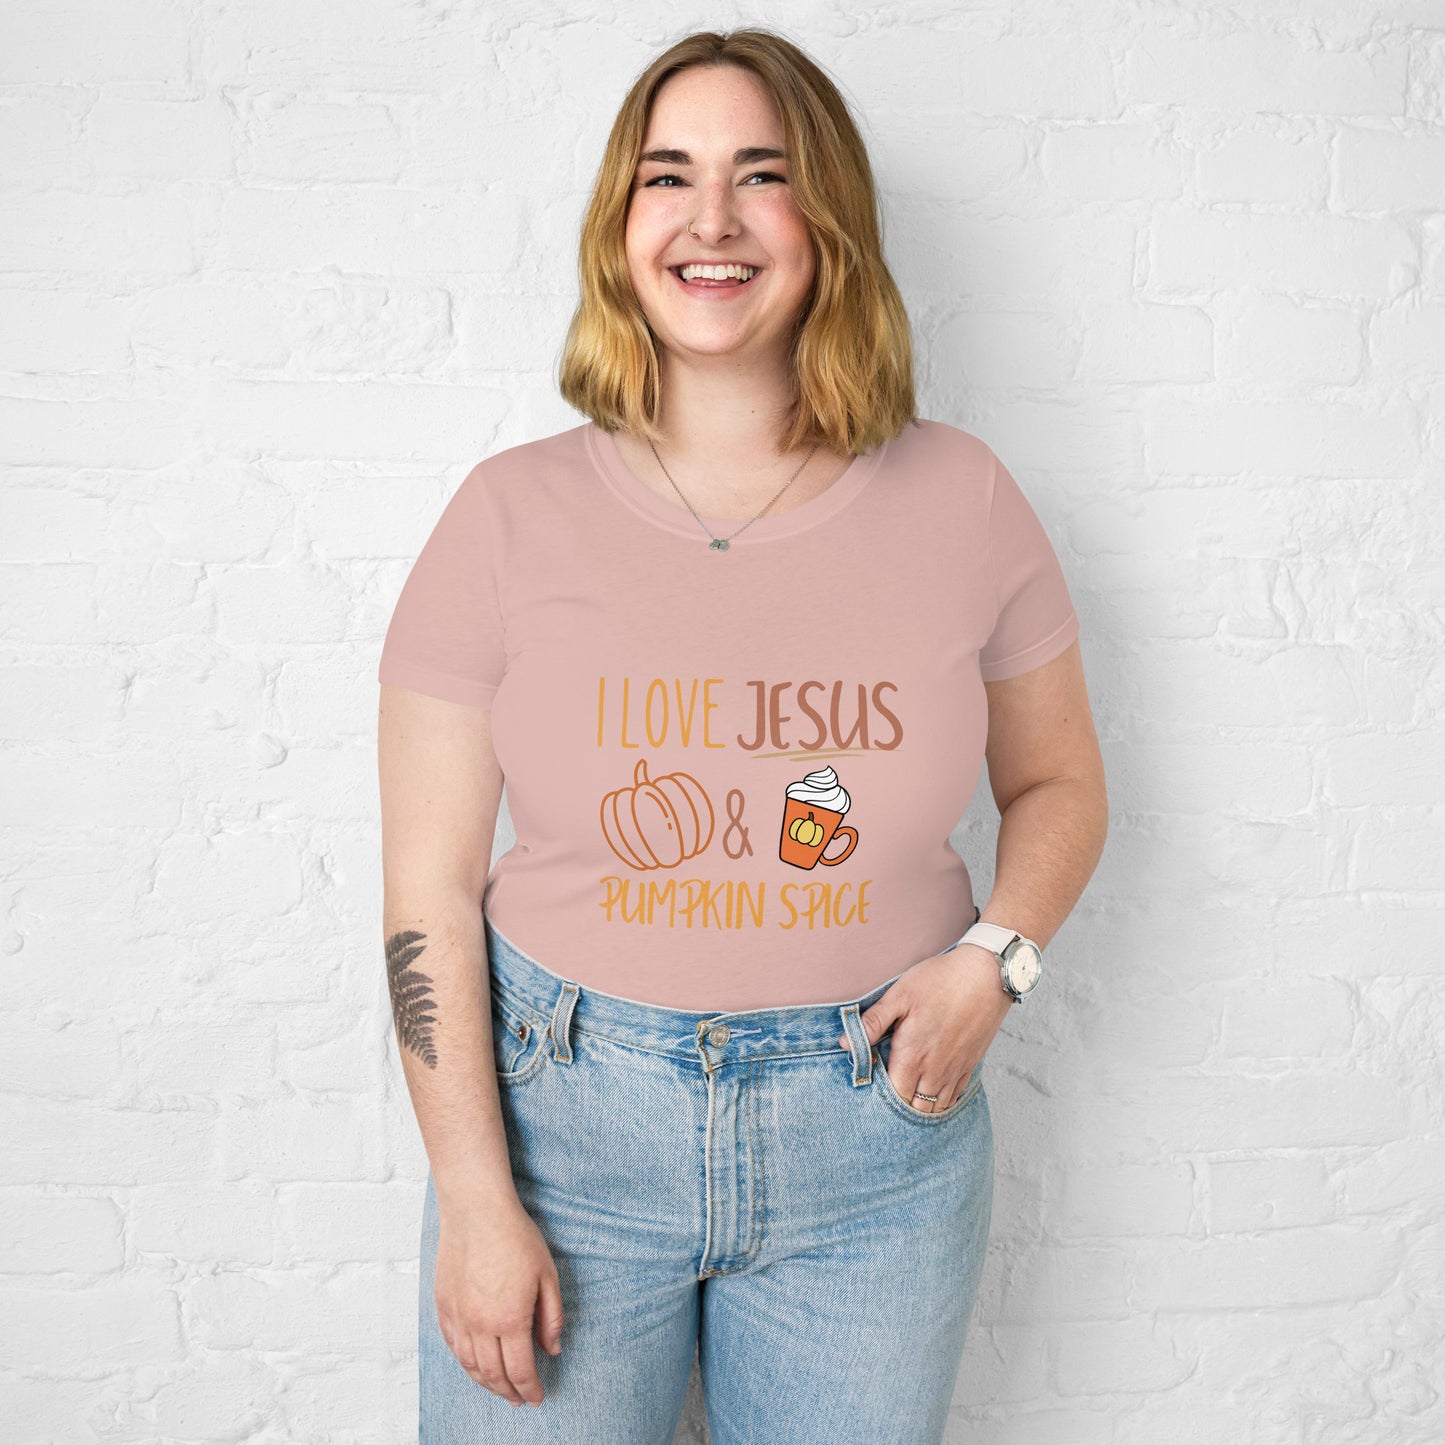 Jesus and Pumpkin Spice - Women’s fitted t-shirt